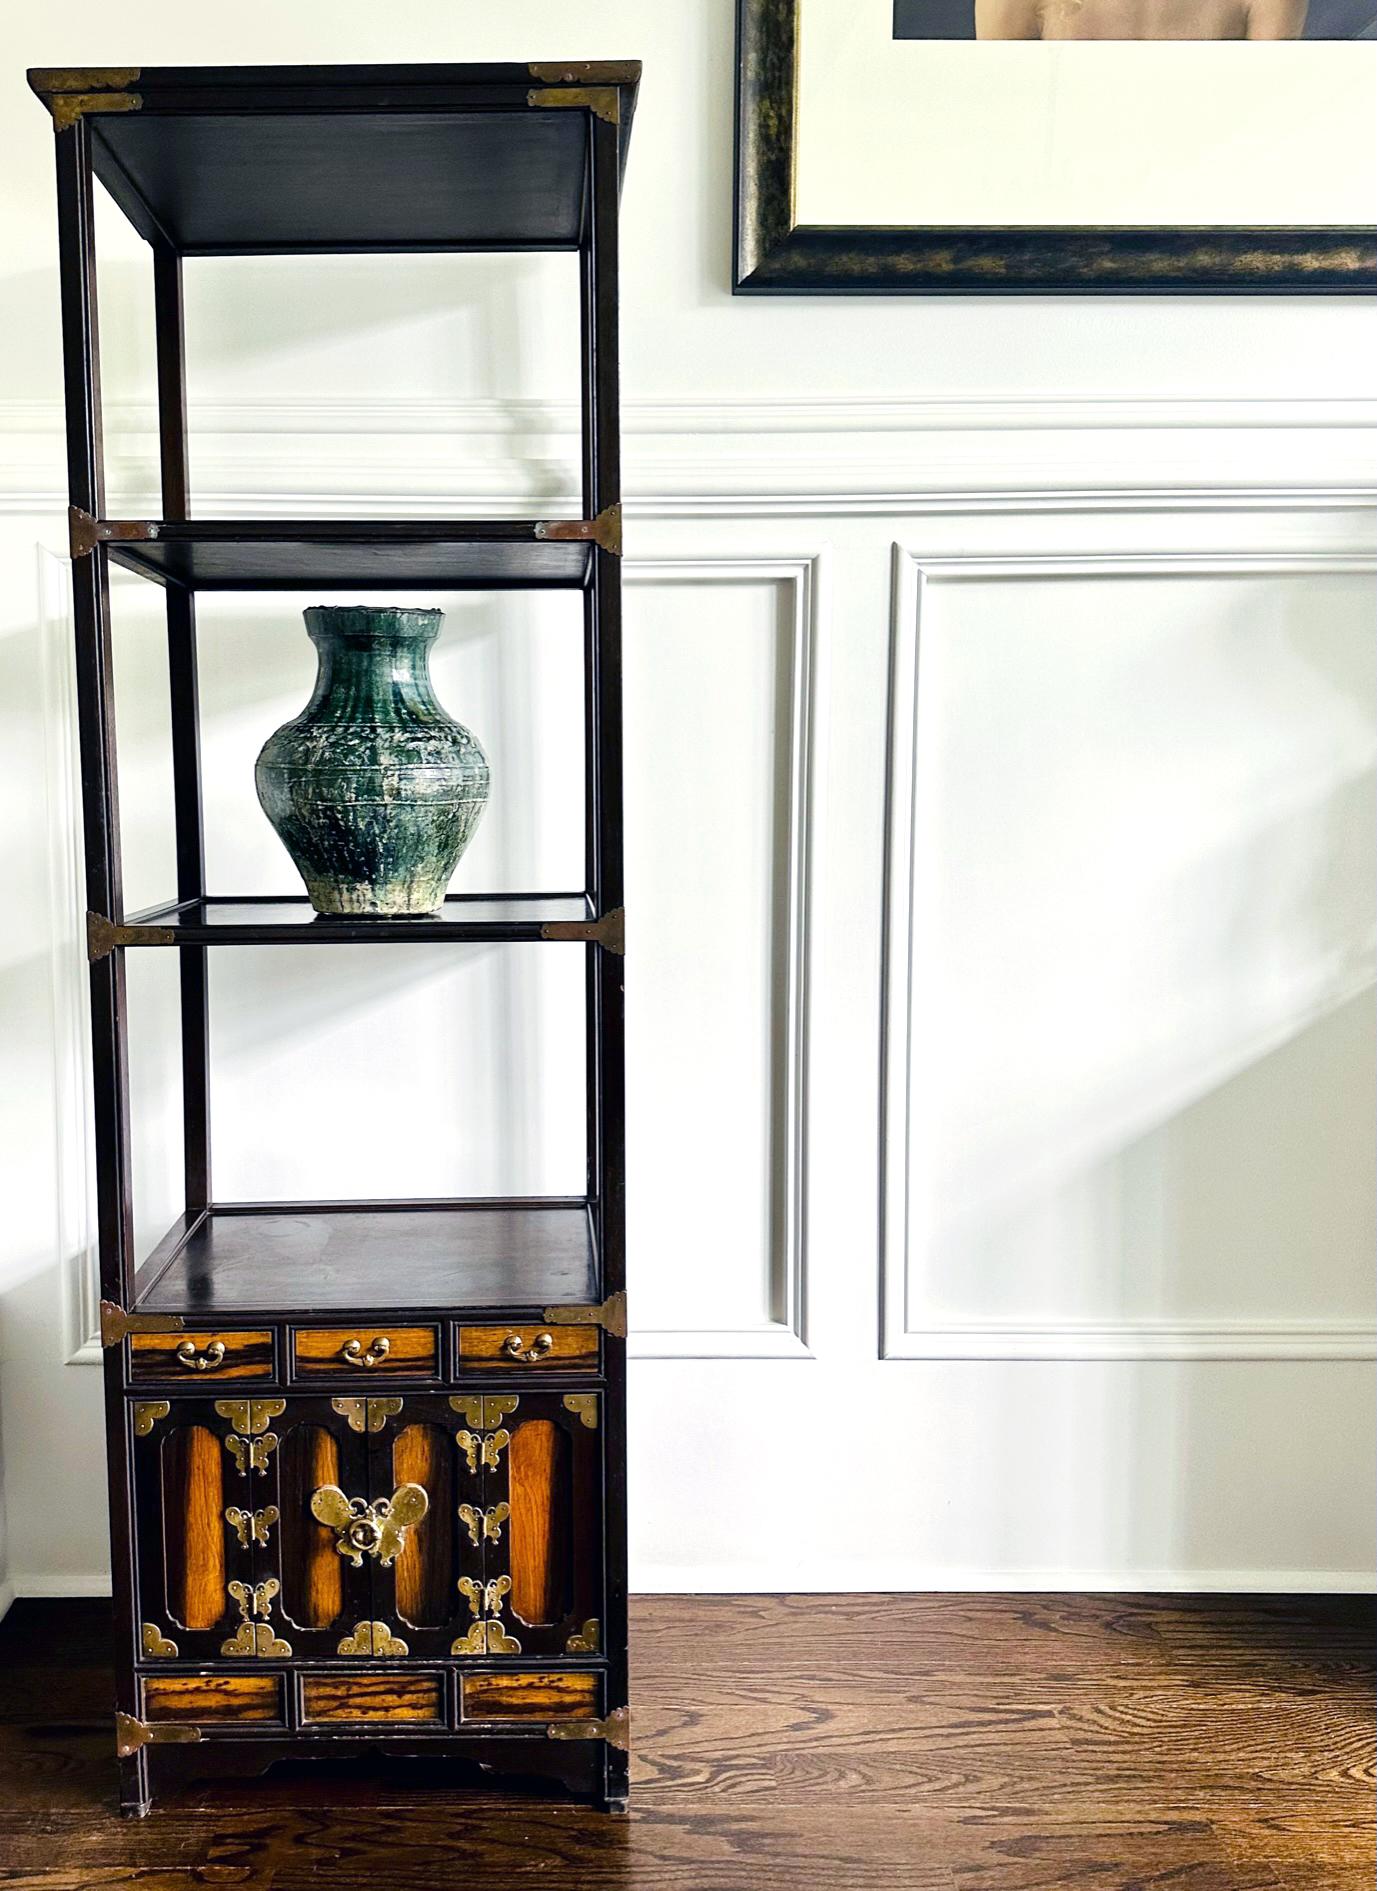 Known in Korean as Sabang Takja (Four-Direction Shelf), this cubic etagere consists of four tiers: three open shelves and the lower storage, which is further divided into a row of three small drawers and a bottom storage space with doors. With its